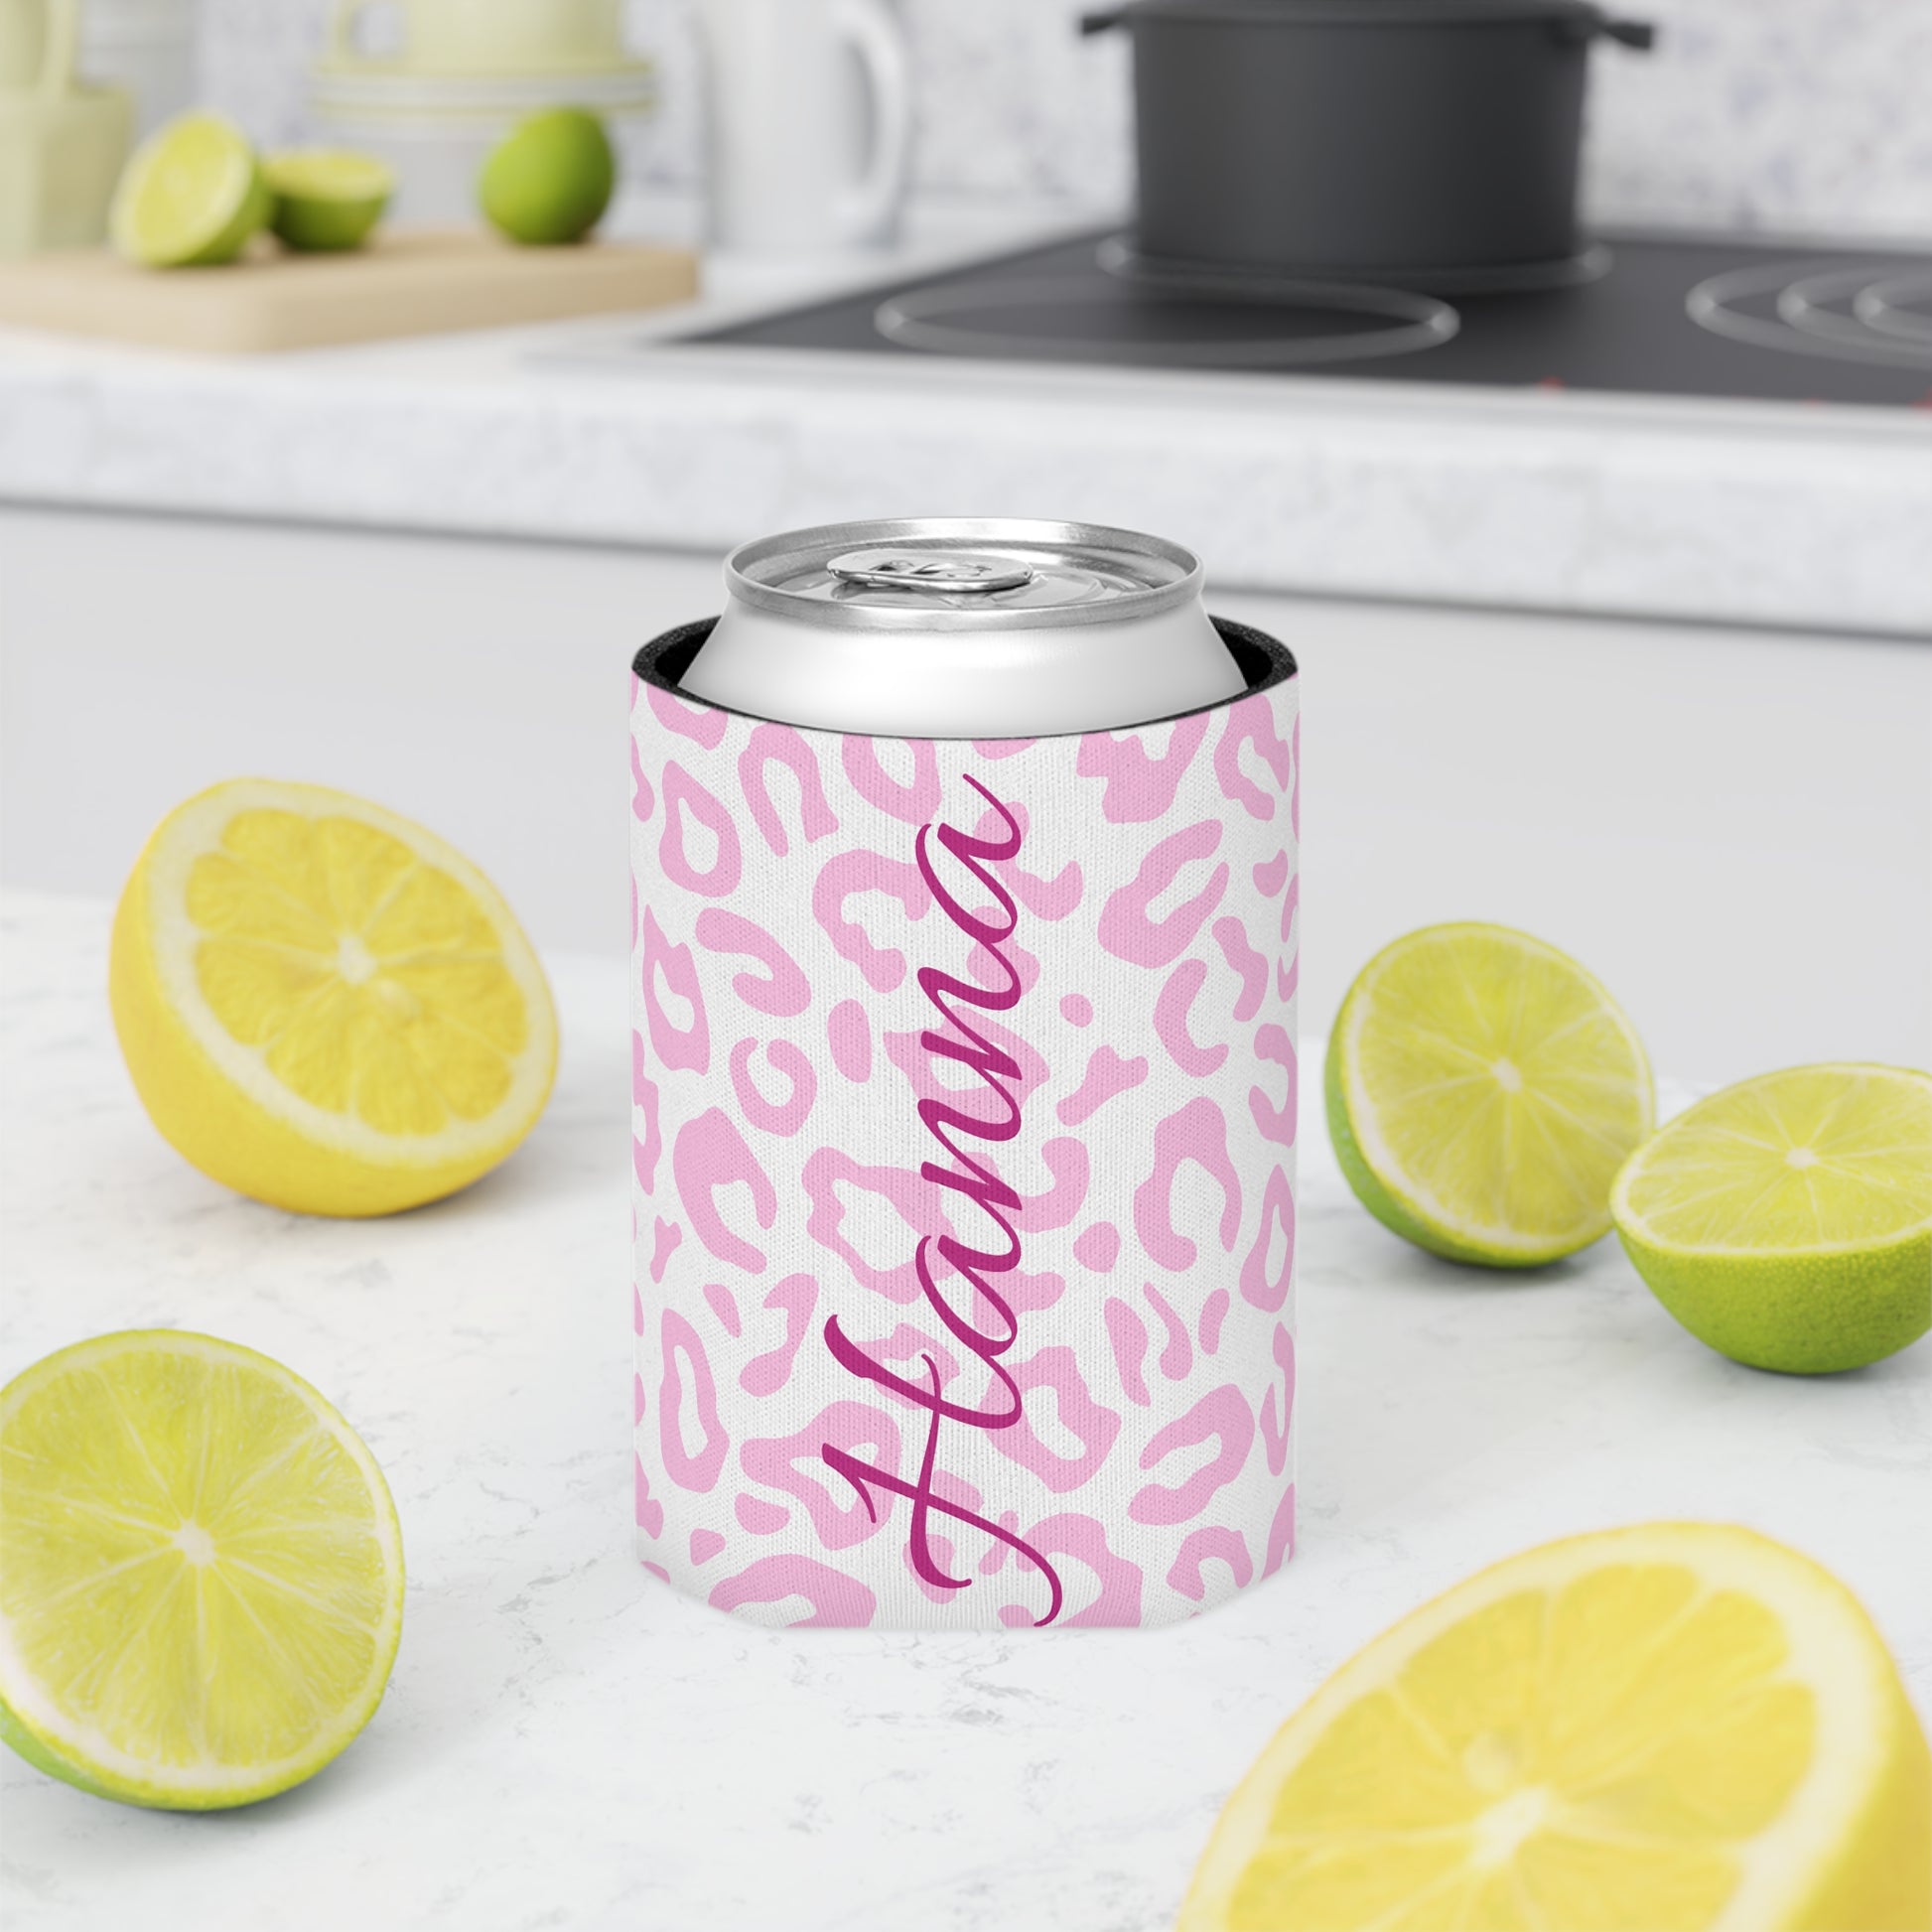 Custom coolers: print personalized can coolers